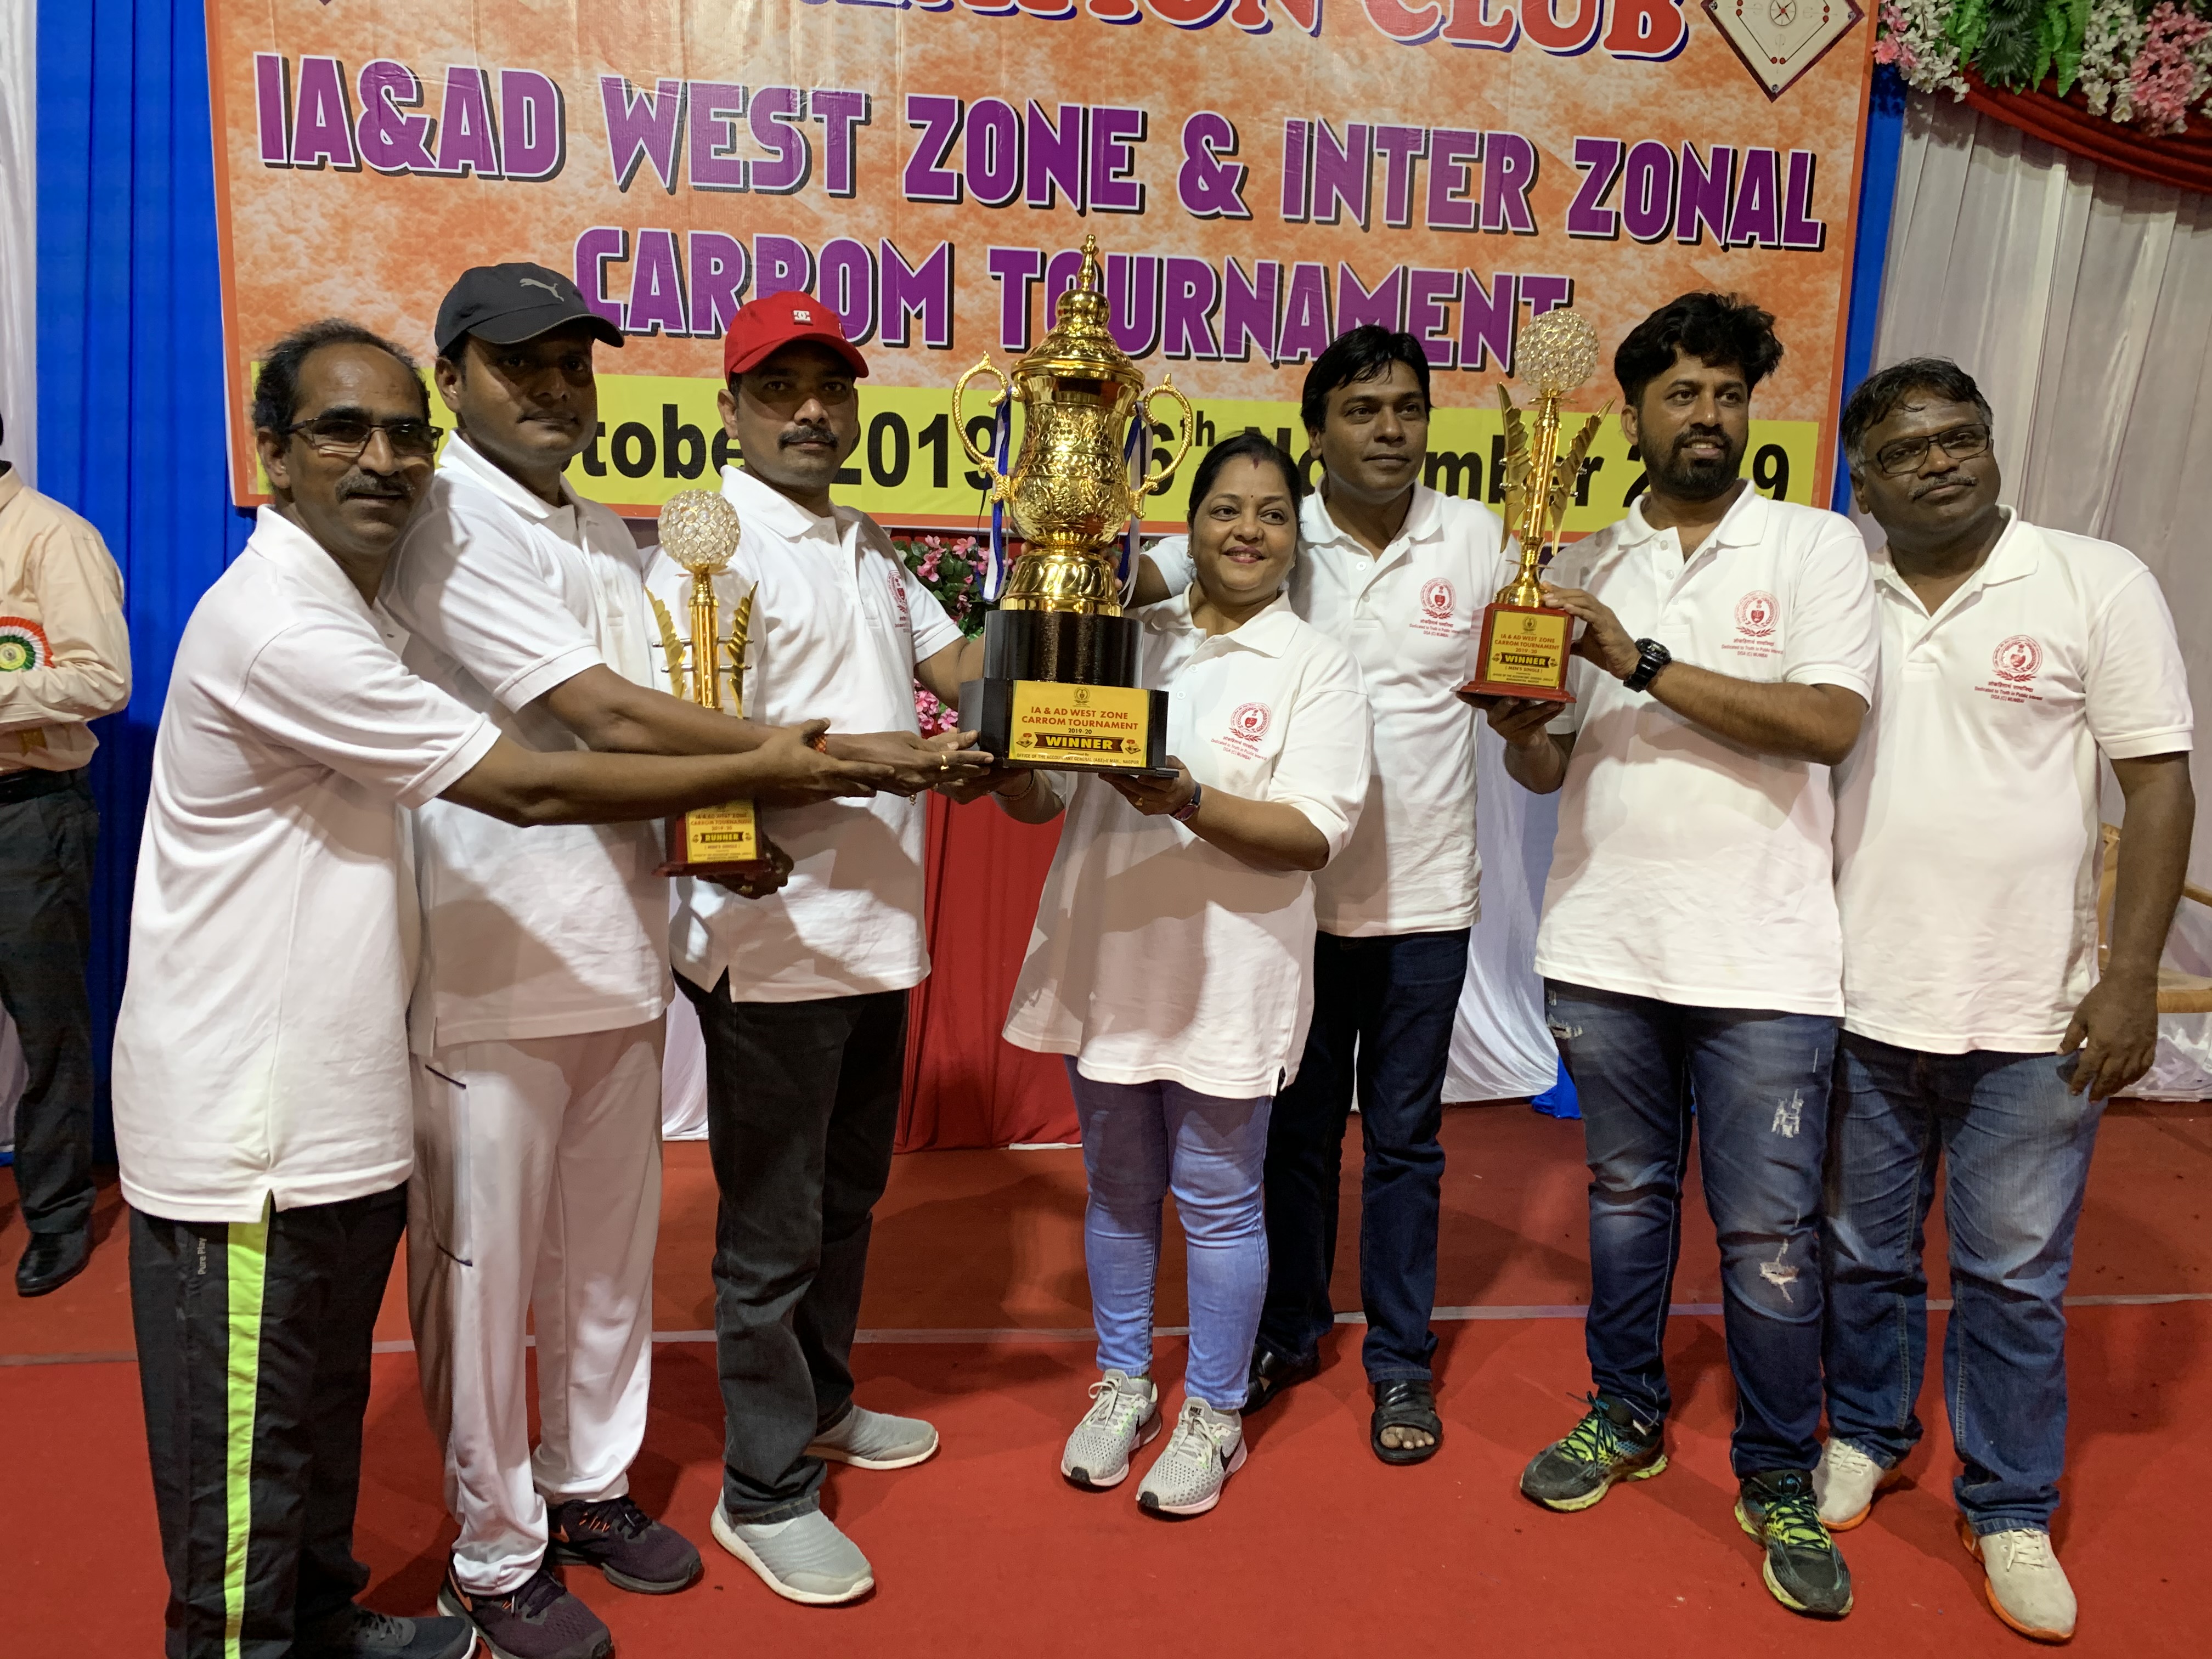 The carrom team of this office was the winner of IA&AD West Zone and Inter-Zonal  Carrom Competition 2019 